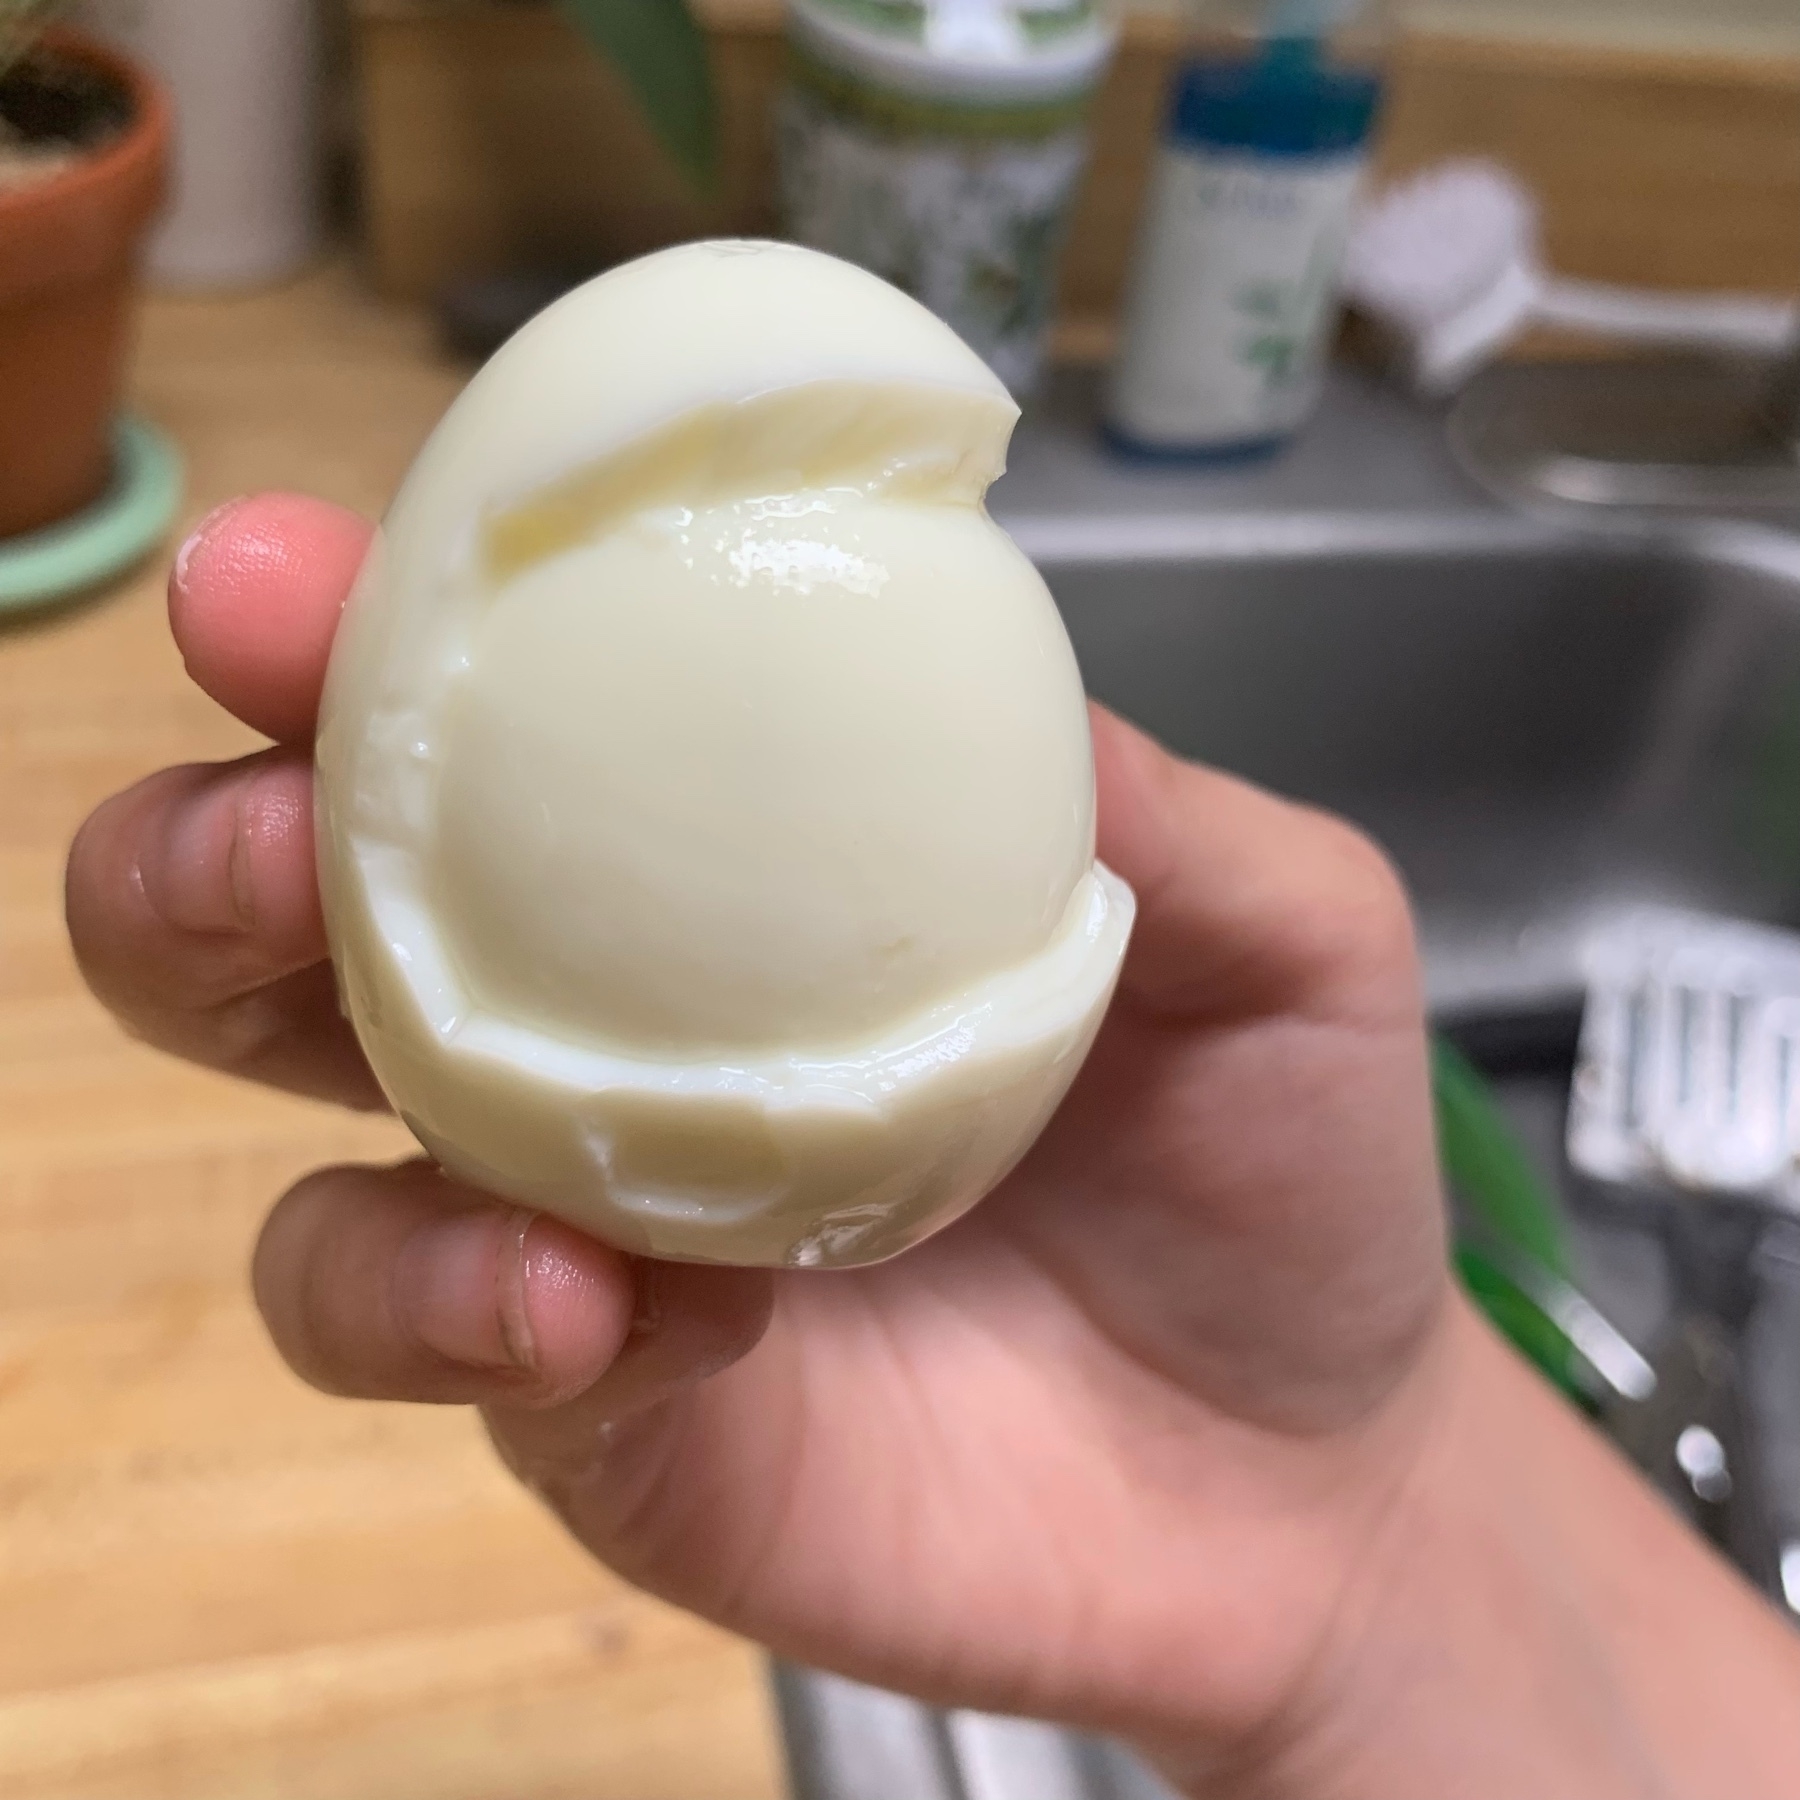 hard boiled egg that looks like "amoung us" game